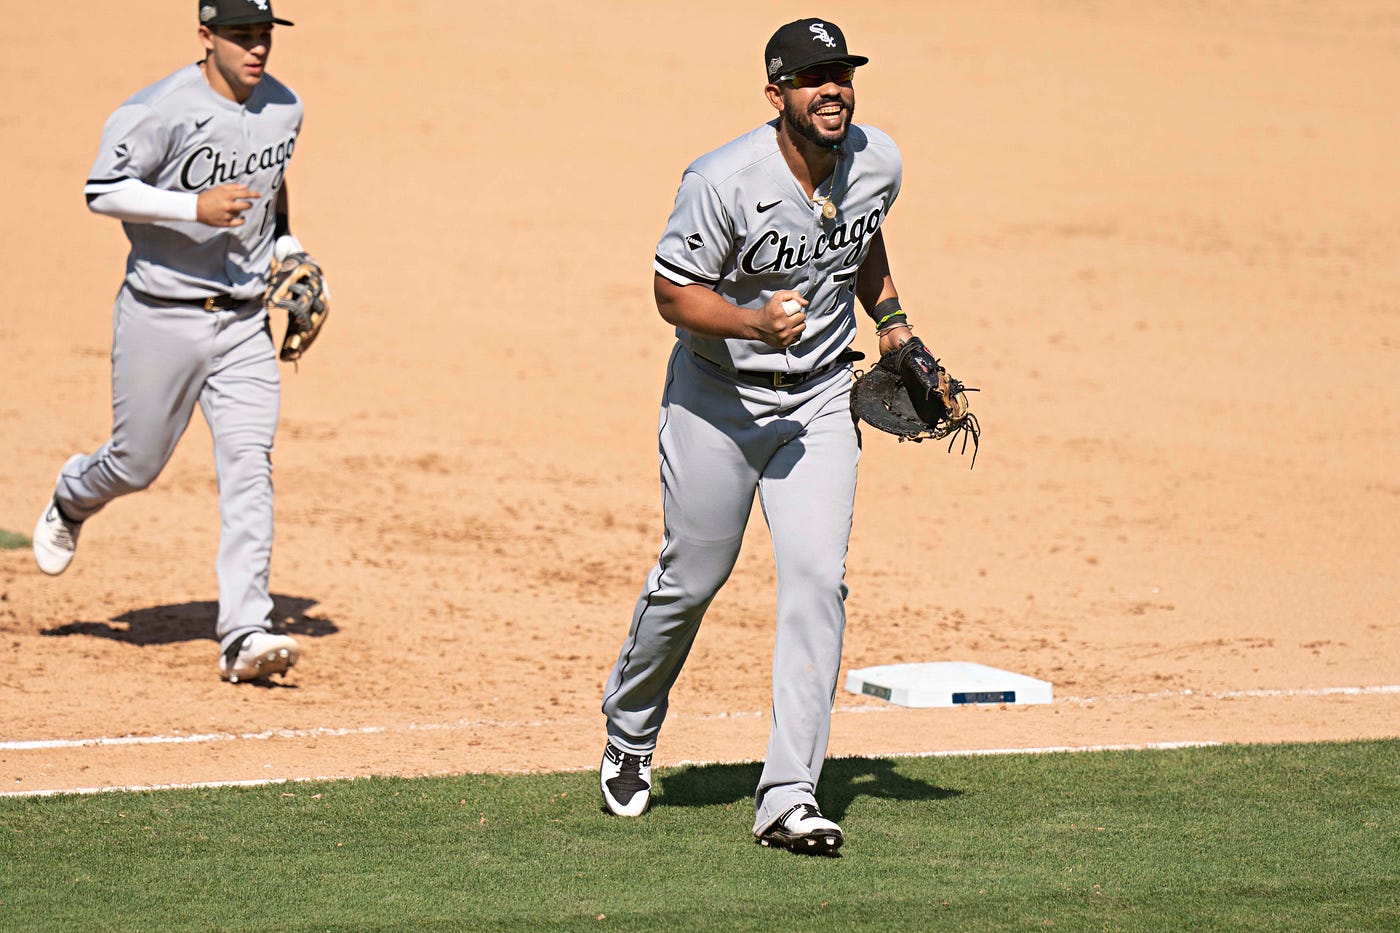 The Ys have it: Yonder Alonso = Yasmani Grandal, with a side of